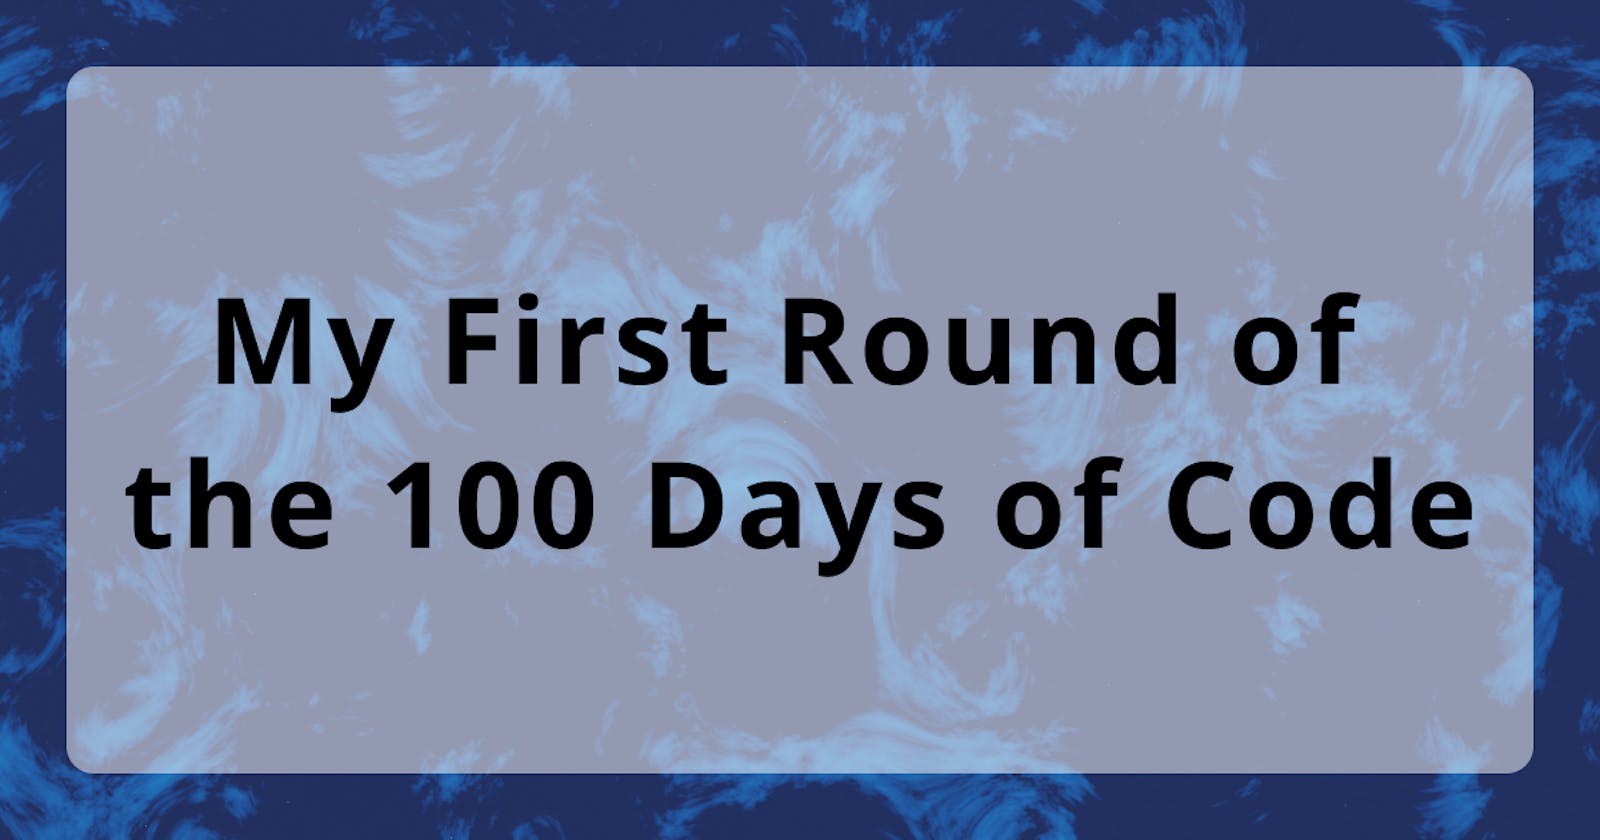 My First Round of the 100 Days of Code